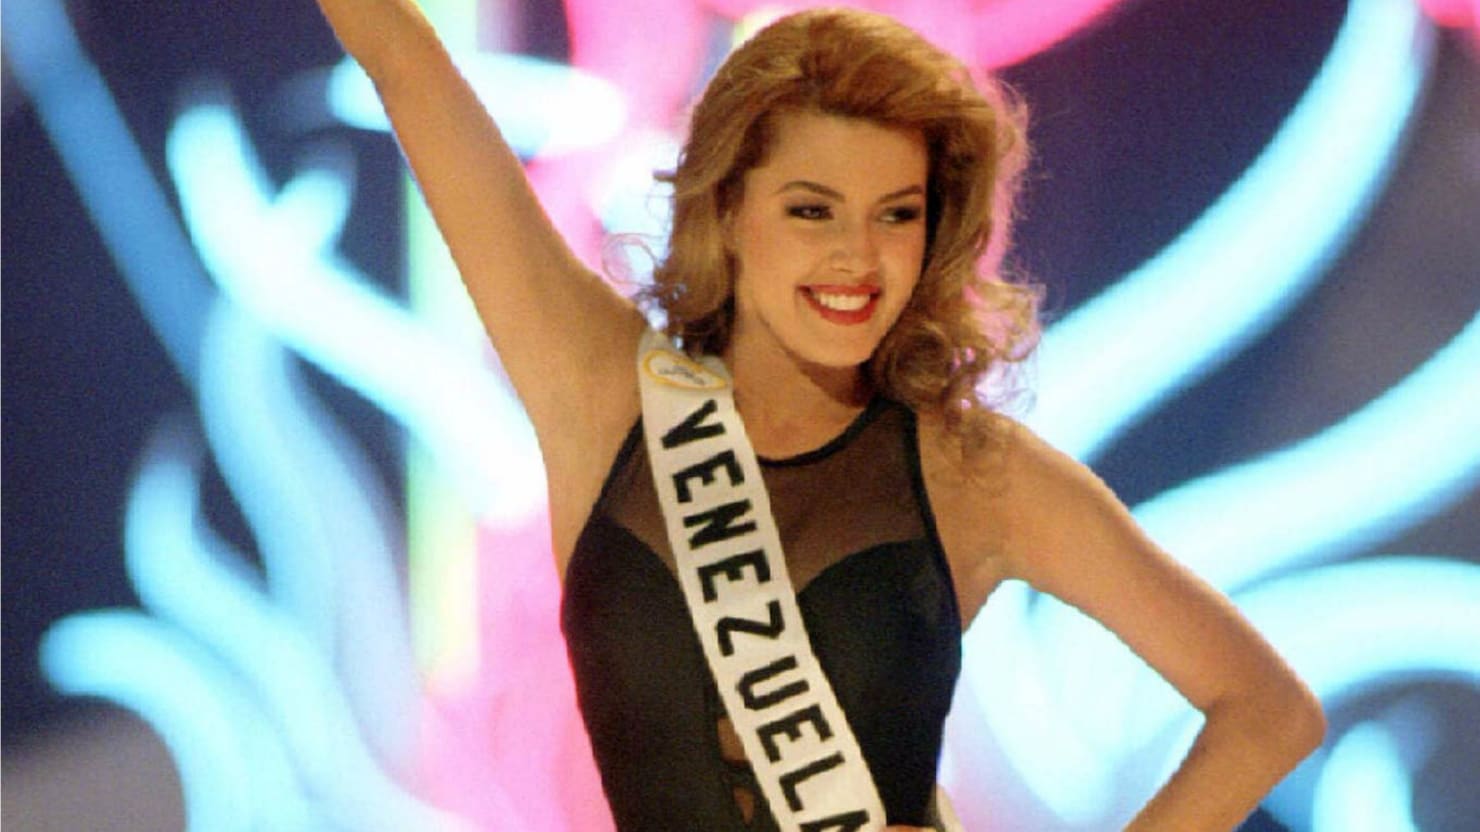 Trump Miss Universe Gained Massive Amount Of Weight